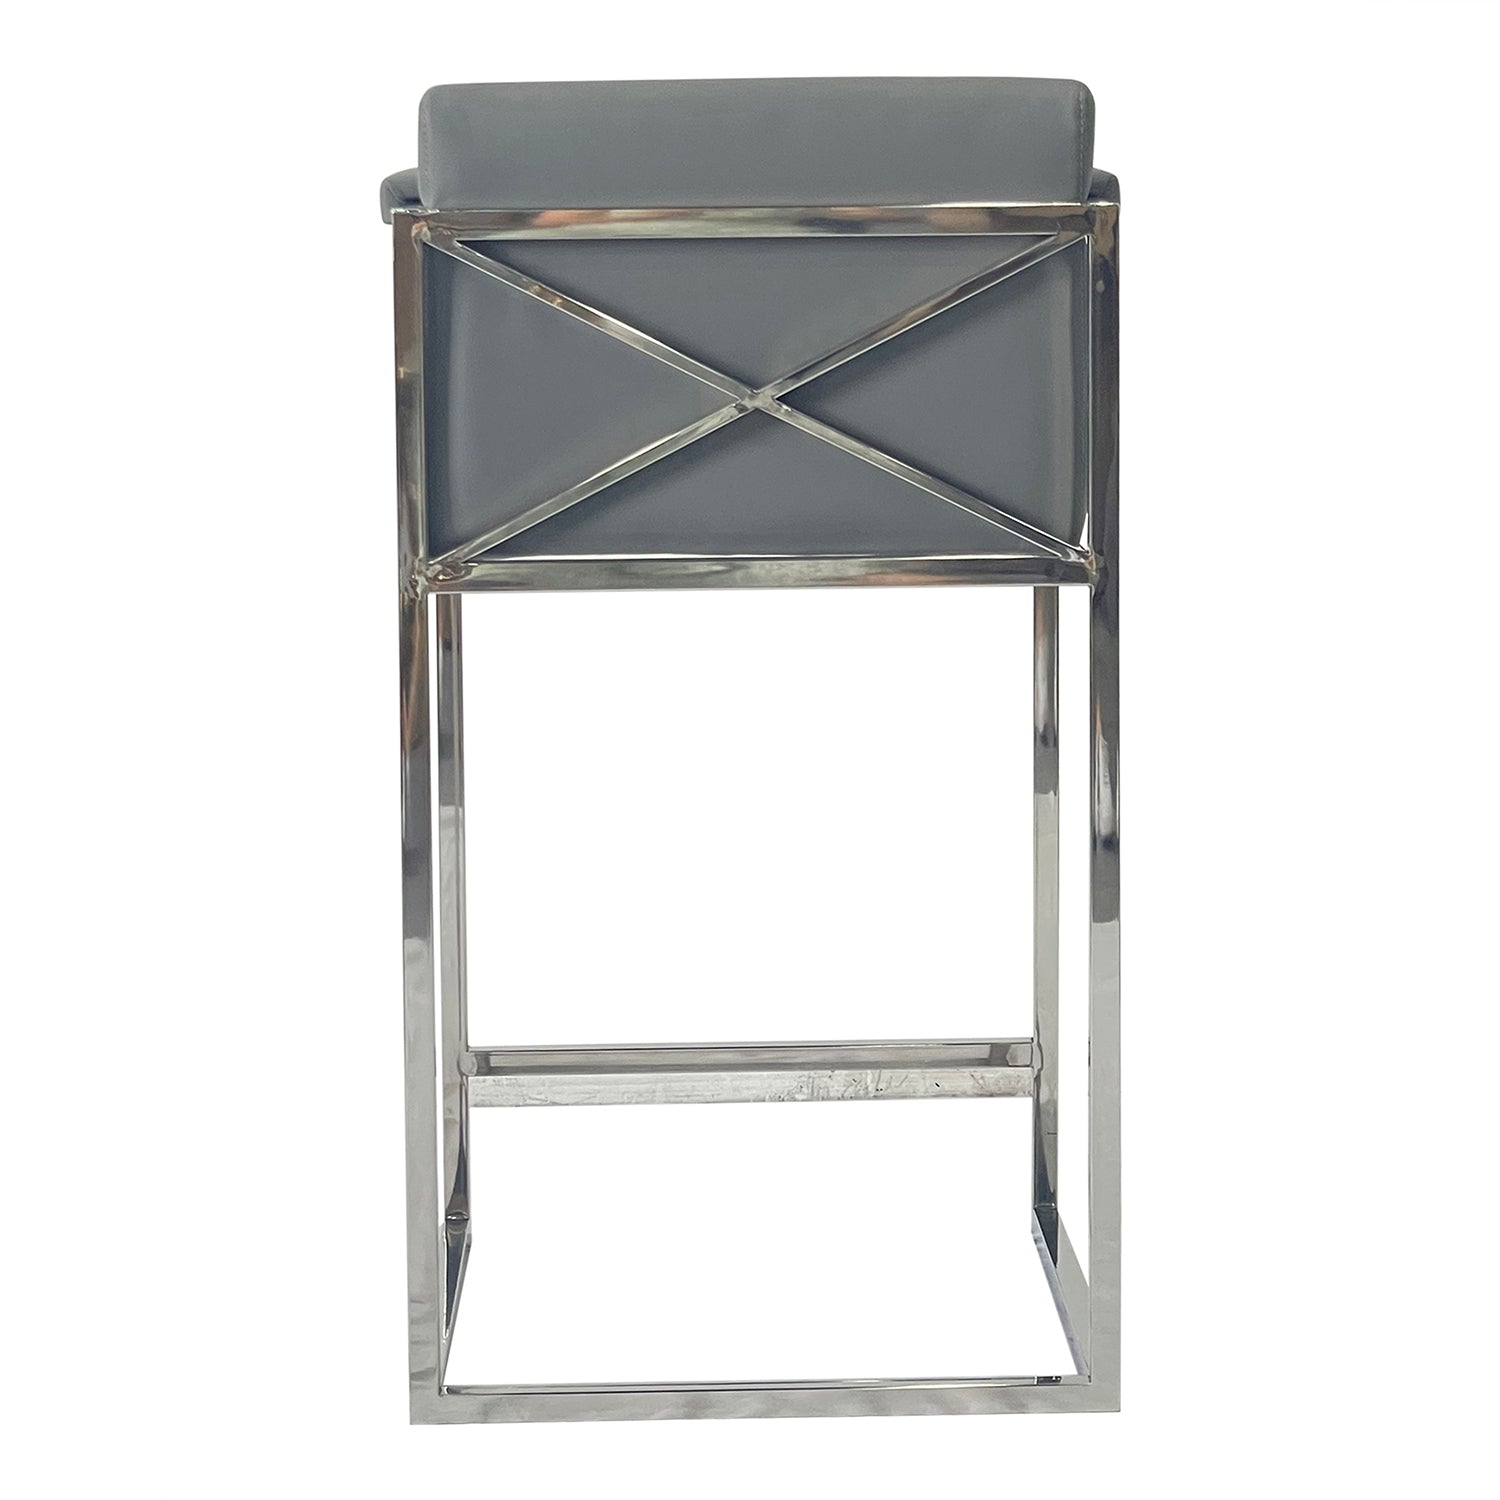 Silver and Gray Dining Chair Bar Stool for Kitchen